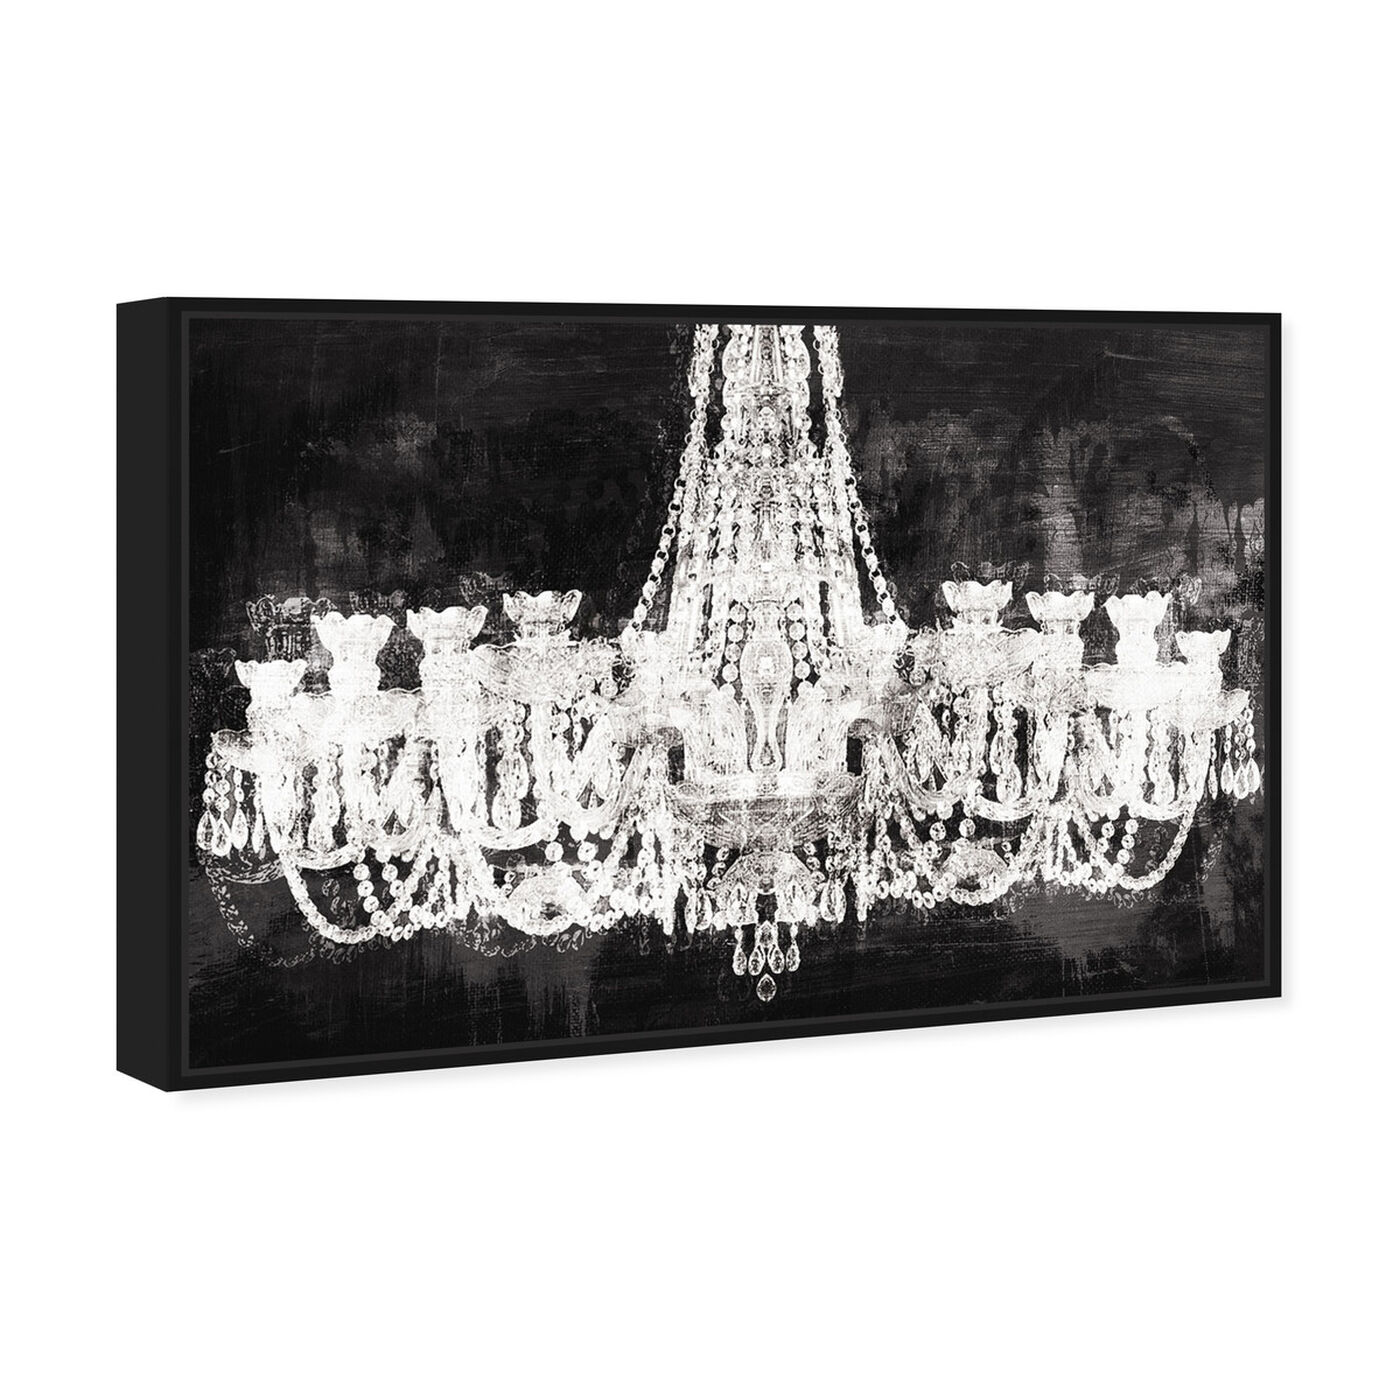 Angled view of Decadent Soiree featuring fashion and glam and chandeliers art.